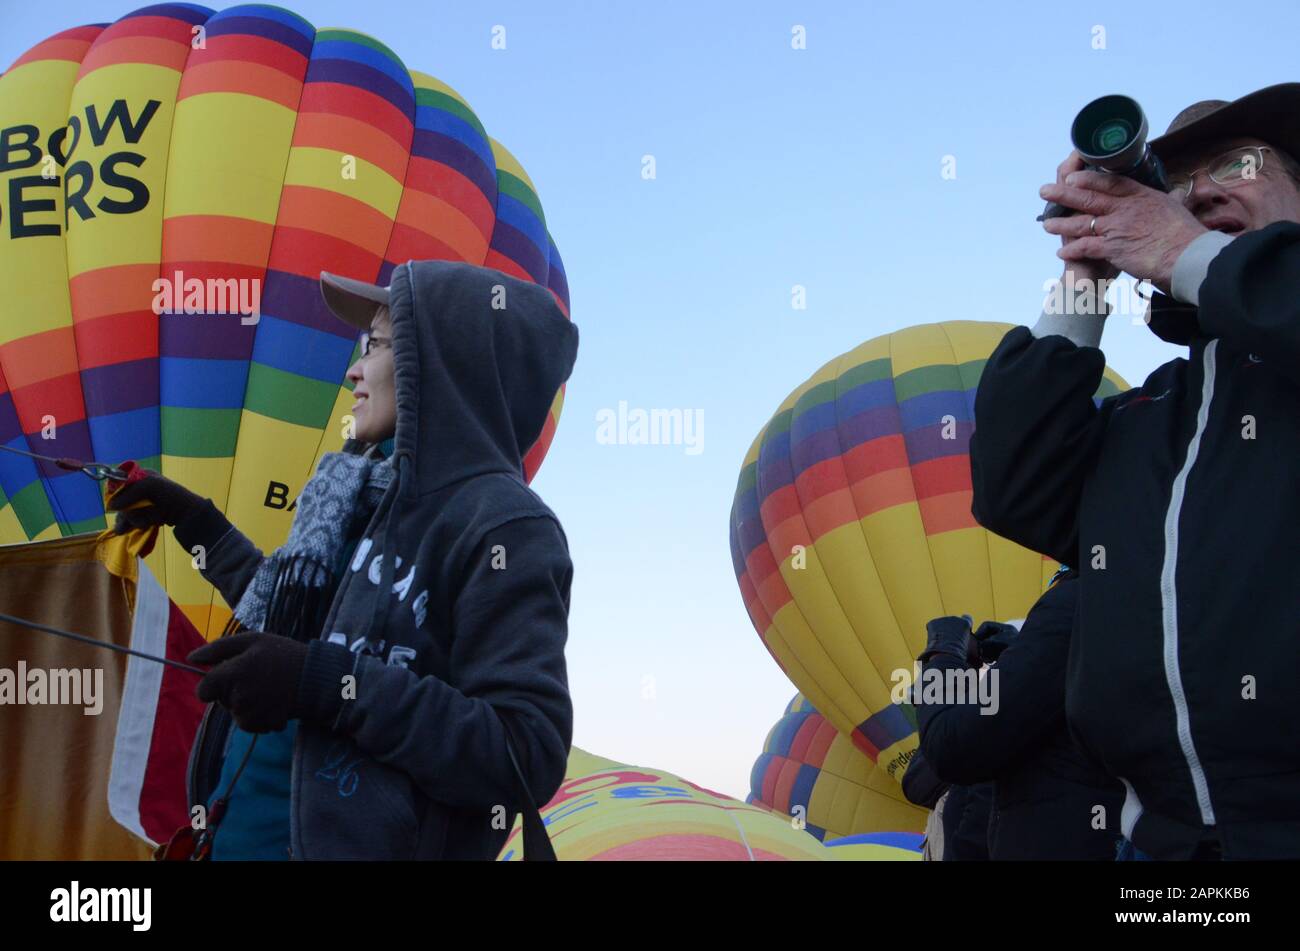 Balloon Fiesta 008 Jpg High Resolution Stock Photography and Images - Alamy